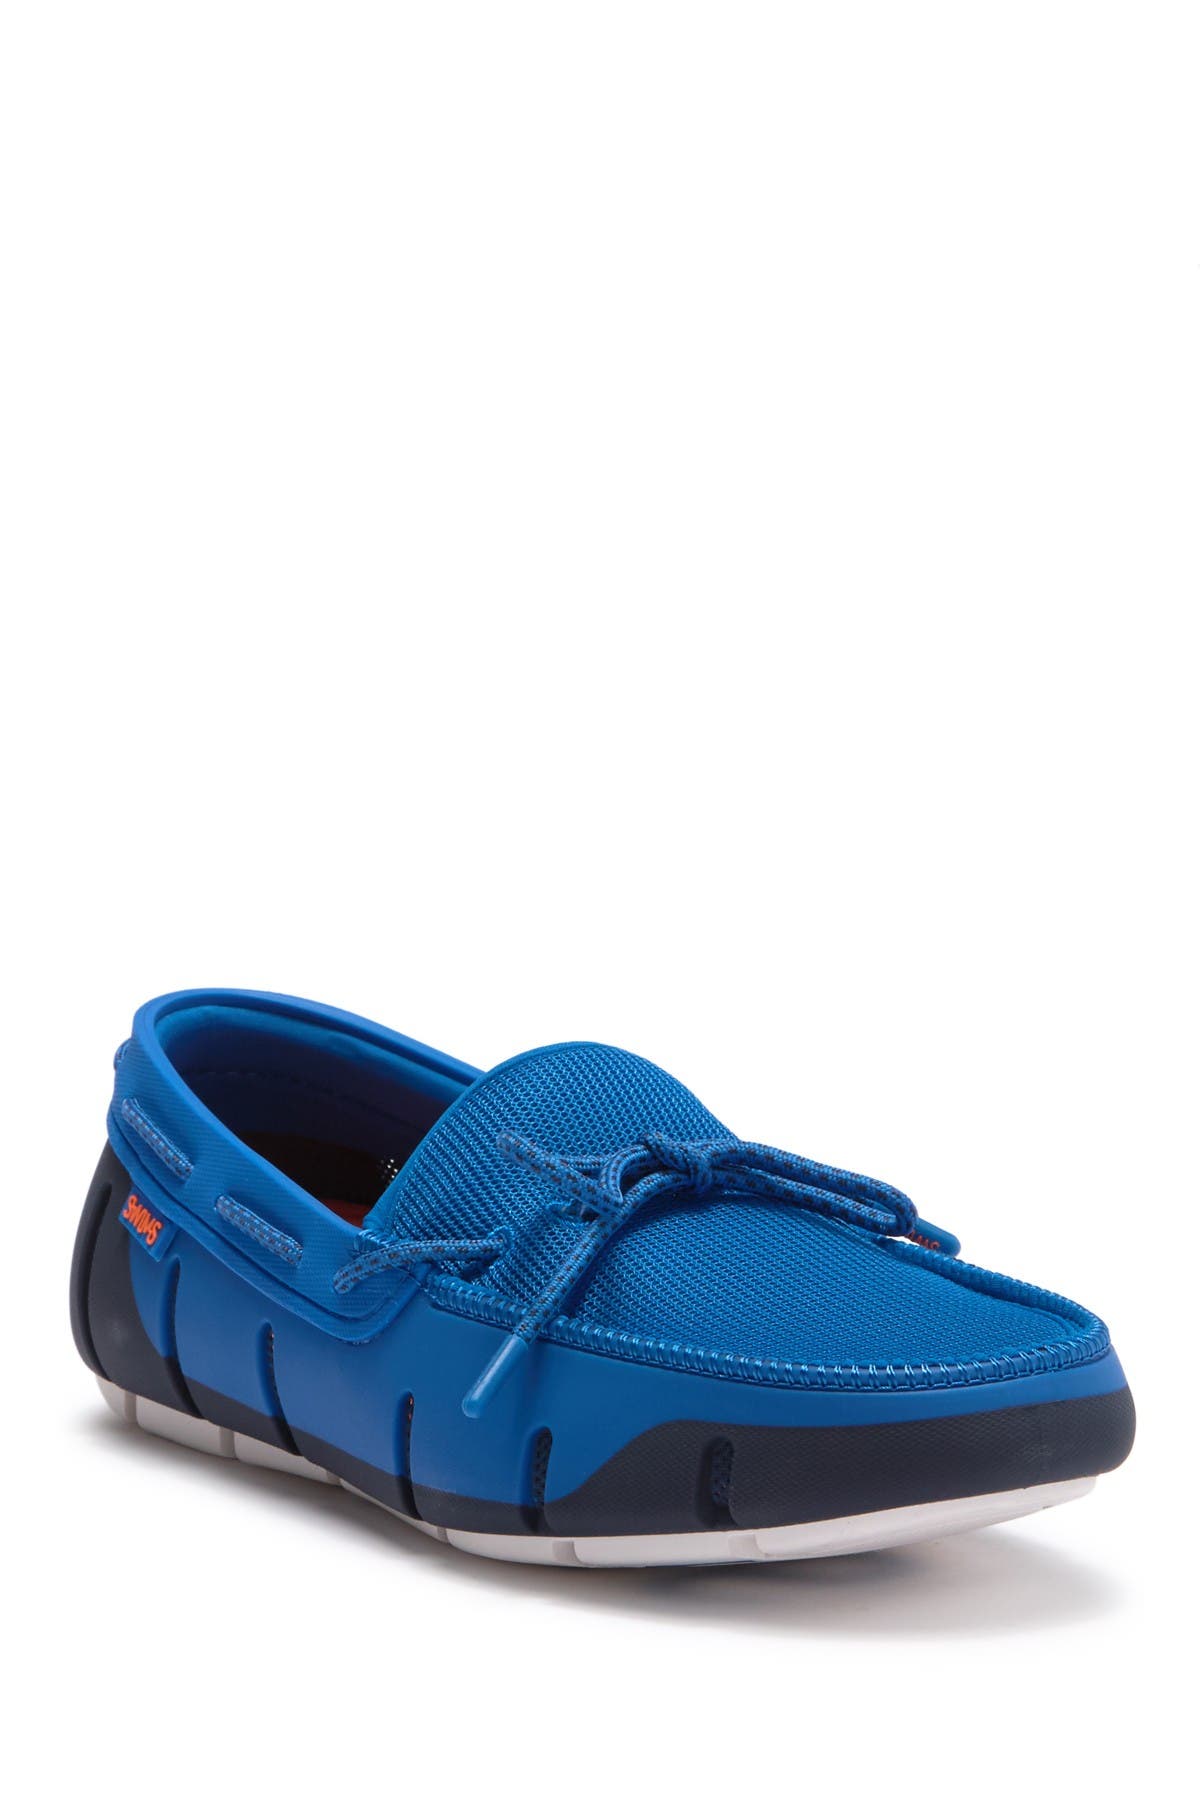 Swims | Stride Lace Loafer | Nordstrom Rack